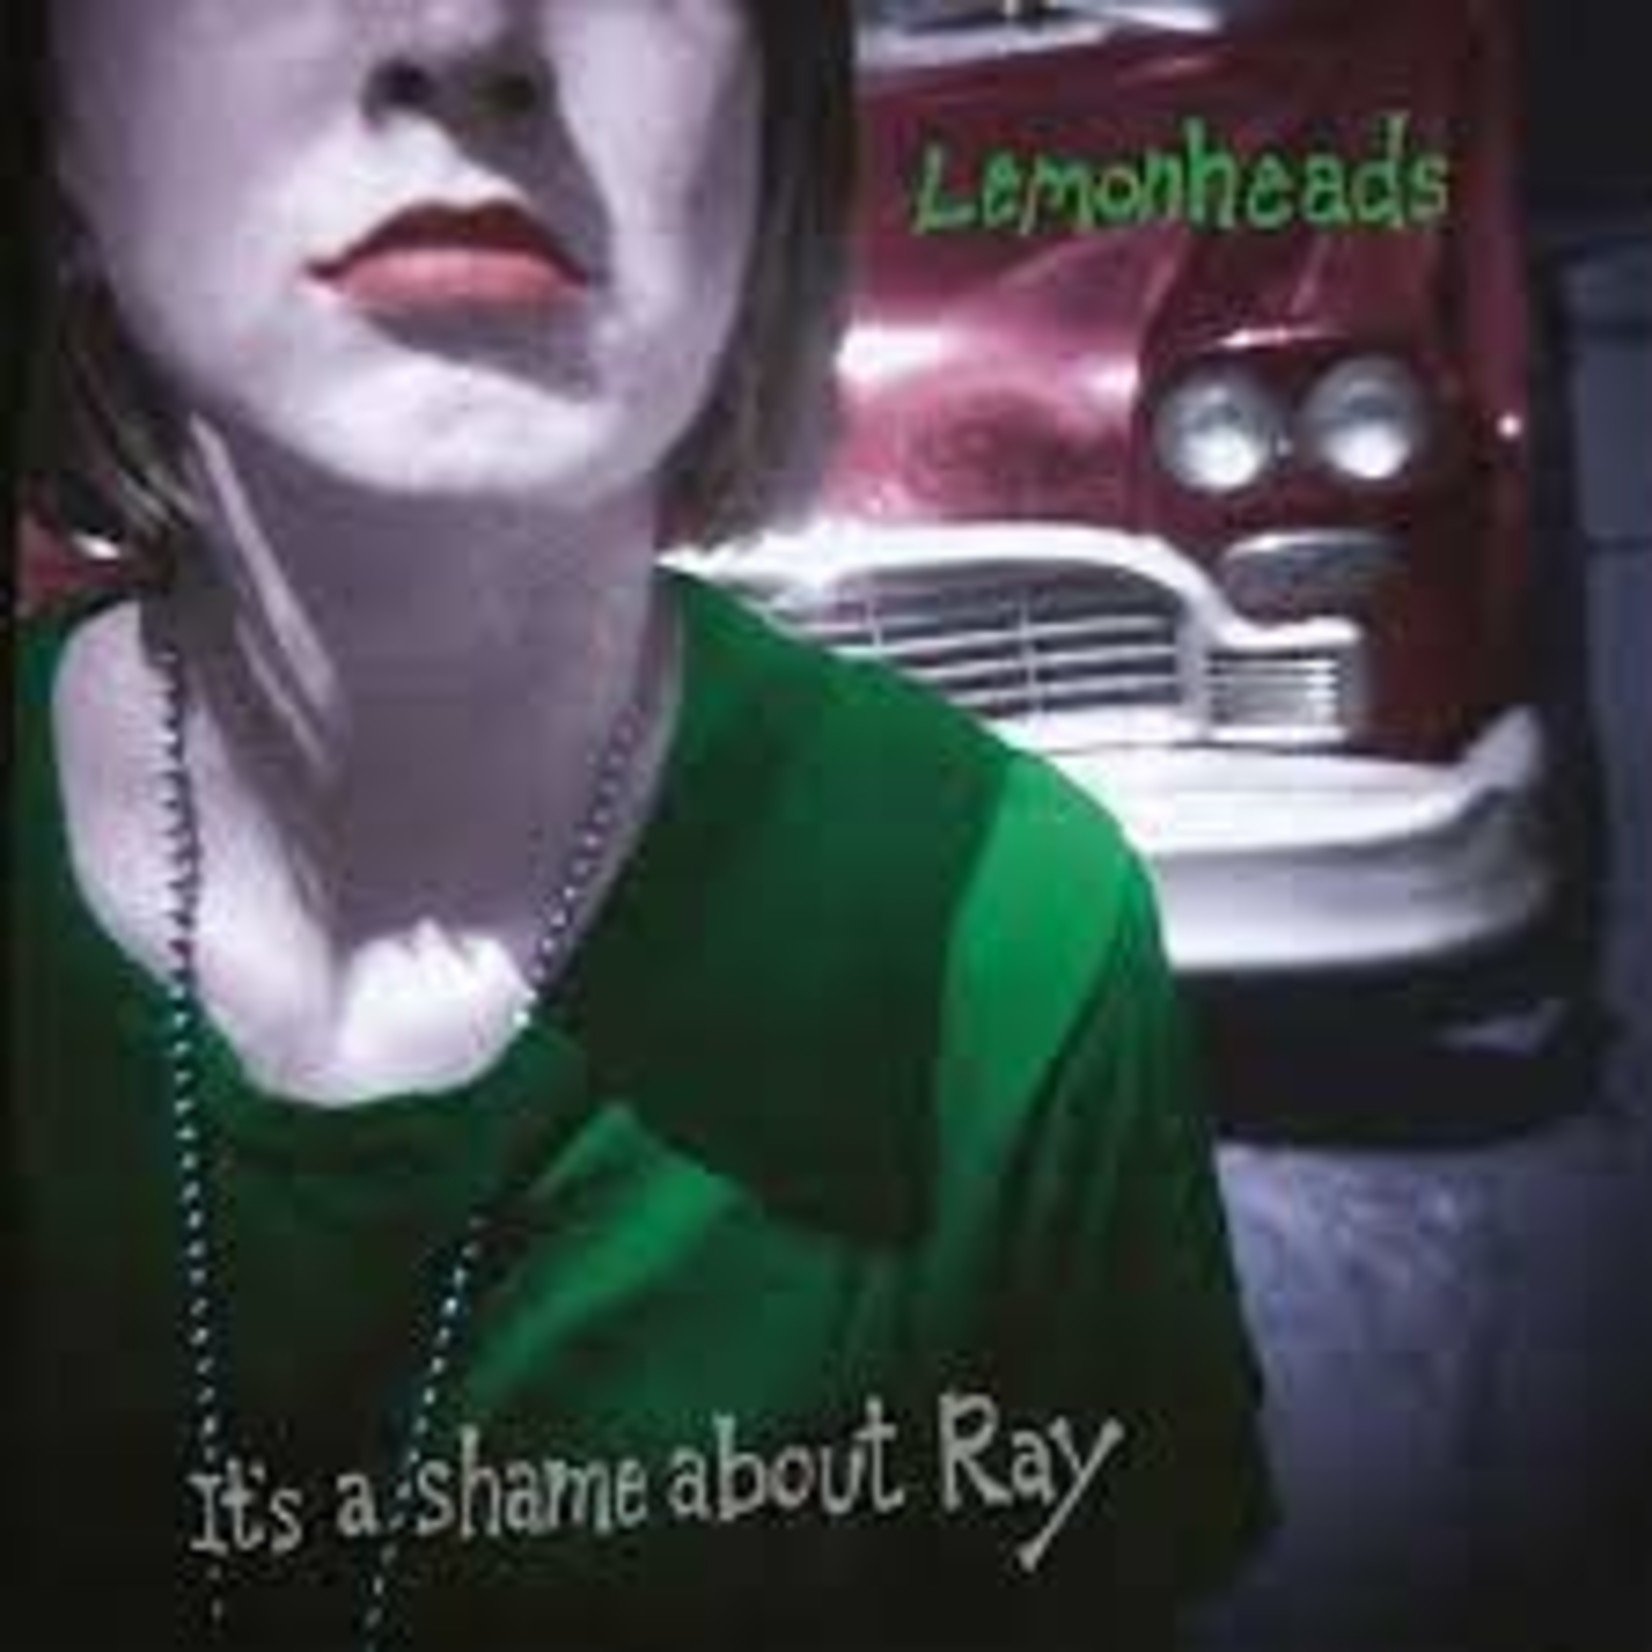 [New] Lemonheads: It's A Shame About Ray (2LP bookback-30th anniversary edition) [FIRE]